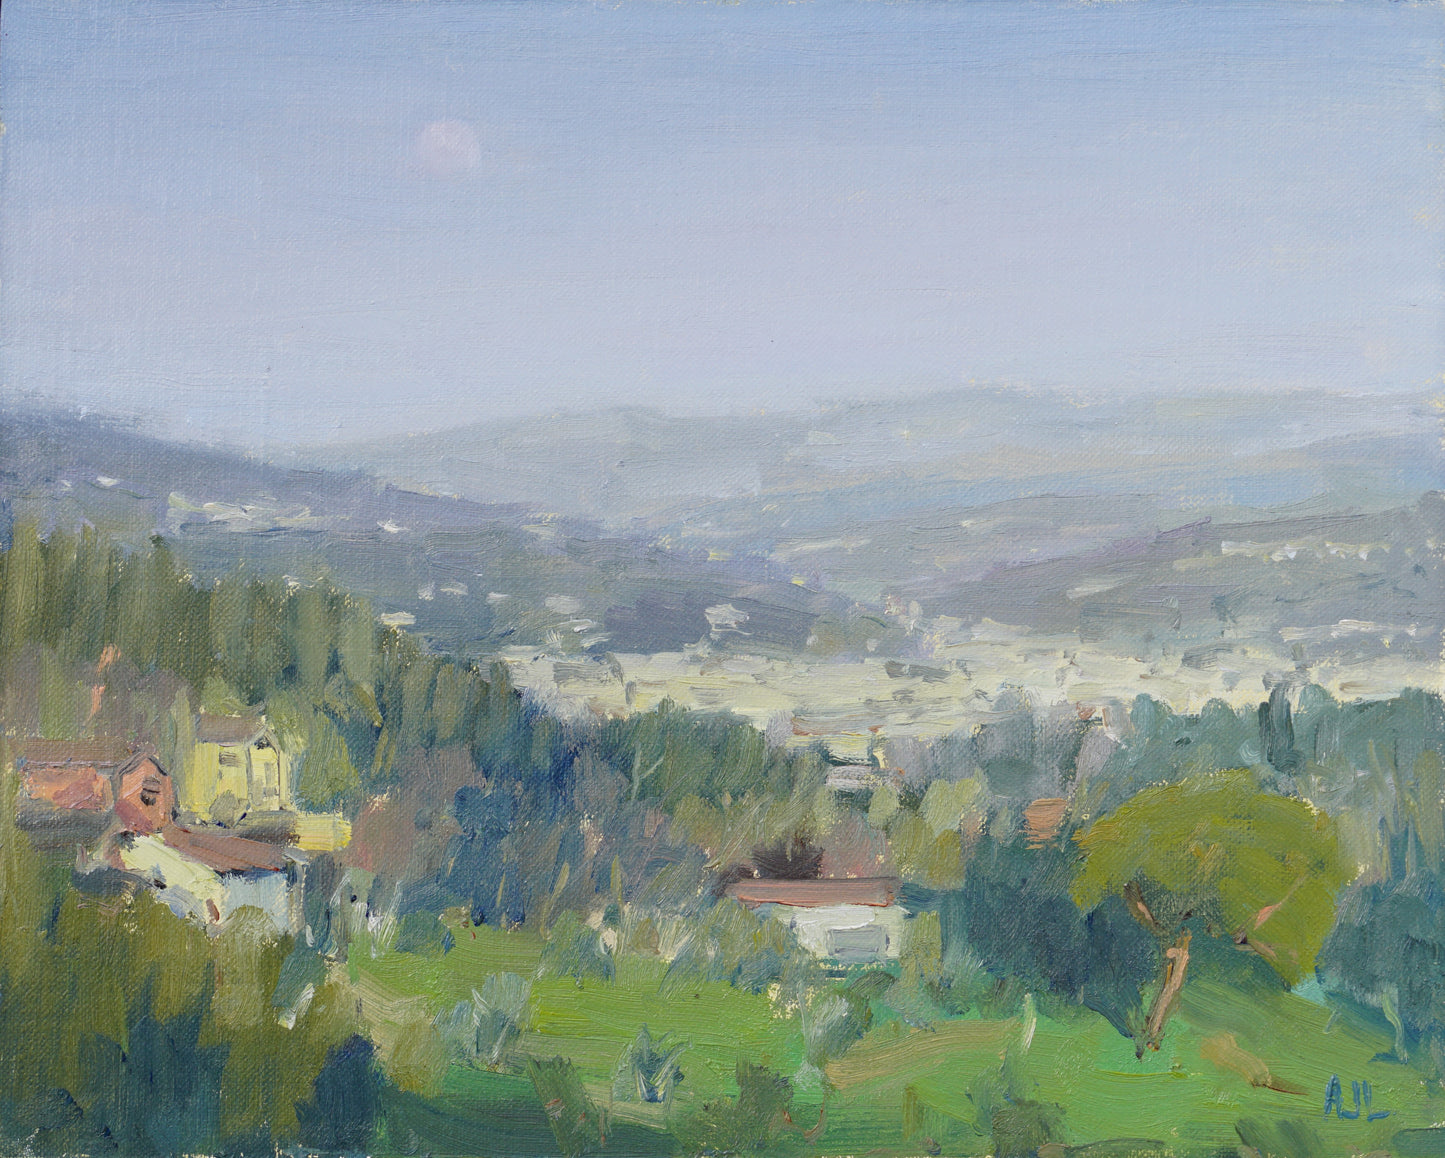 Painting depicting the Tuscany countryside near Florence, with the moon starting to rise above the distant hills.